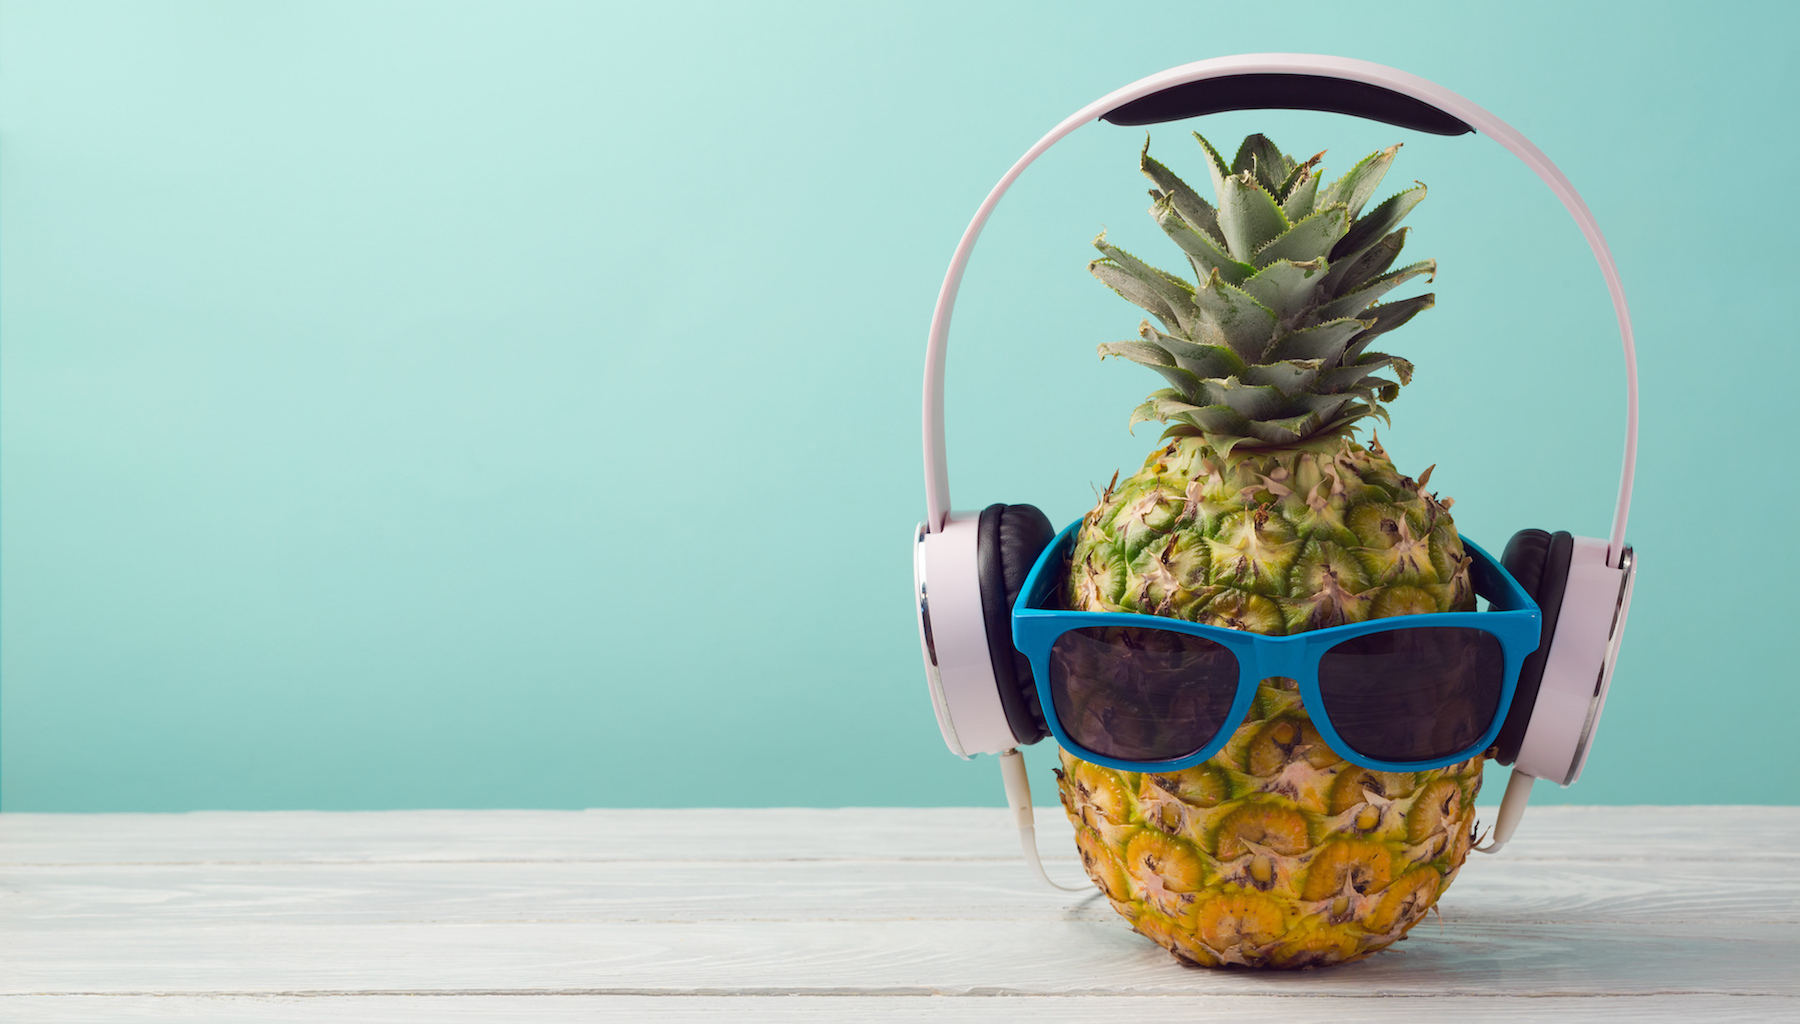 Pineapple with headphones and sunglasses